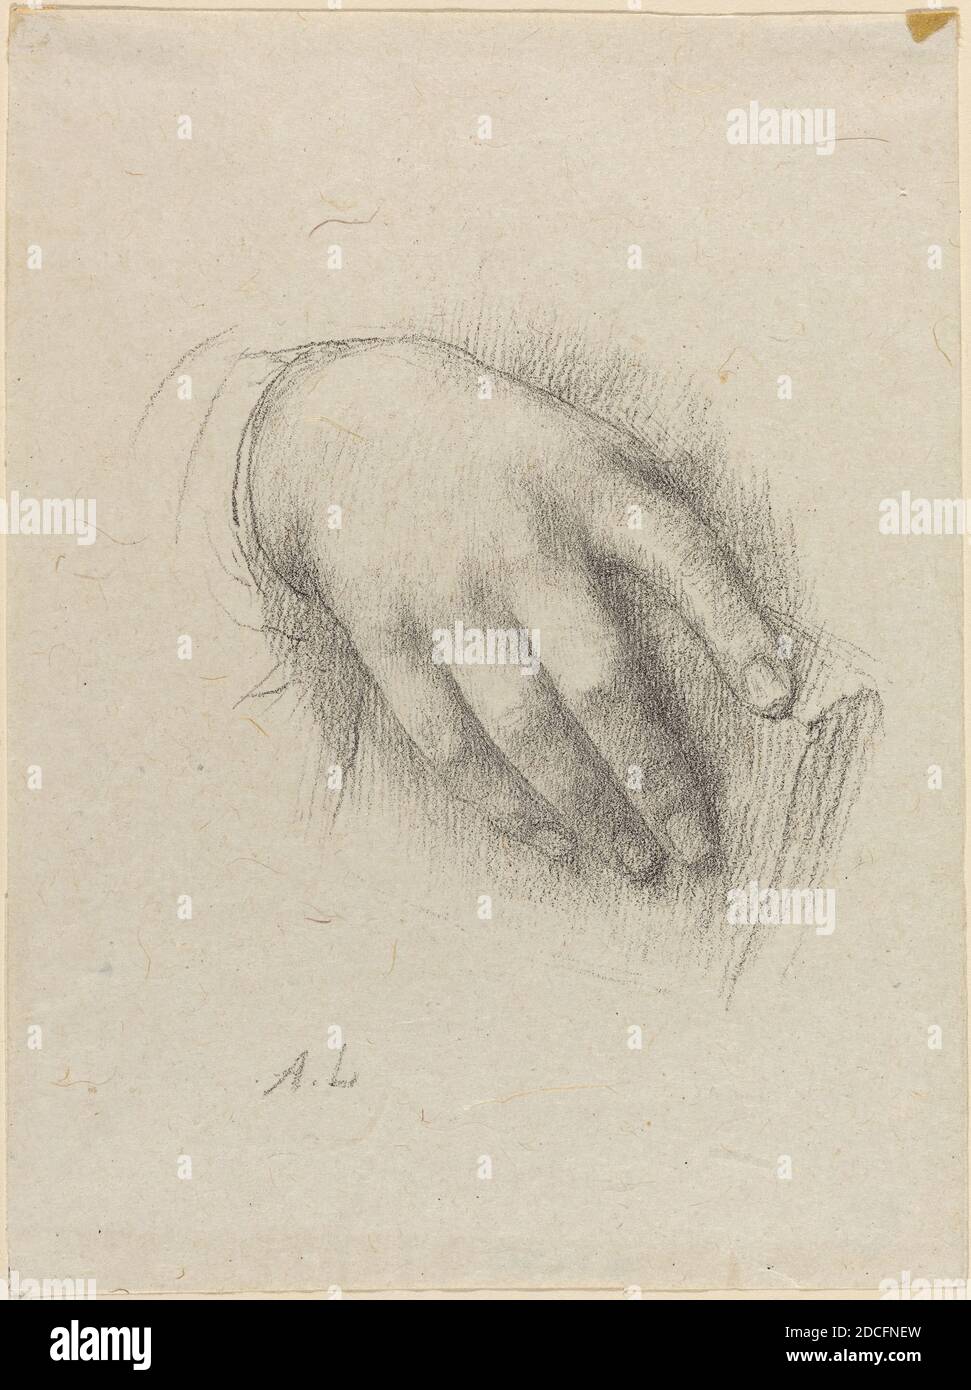 Alphonse Legros, (artist), French, 1837 - 1911, The Hand of the Artist's Daughter, black crayon, overall (approximate): 18.2 x 13.6 cm (7 3/16 x 5 3/8 in Stock Photo